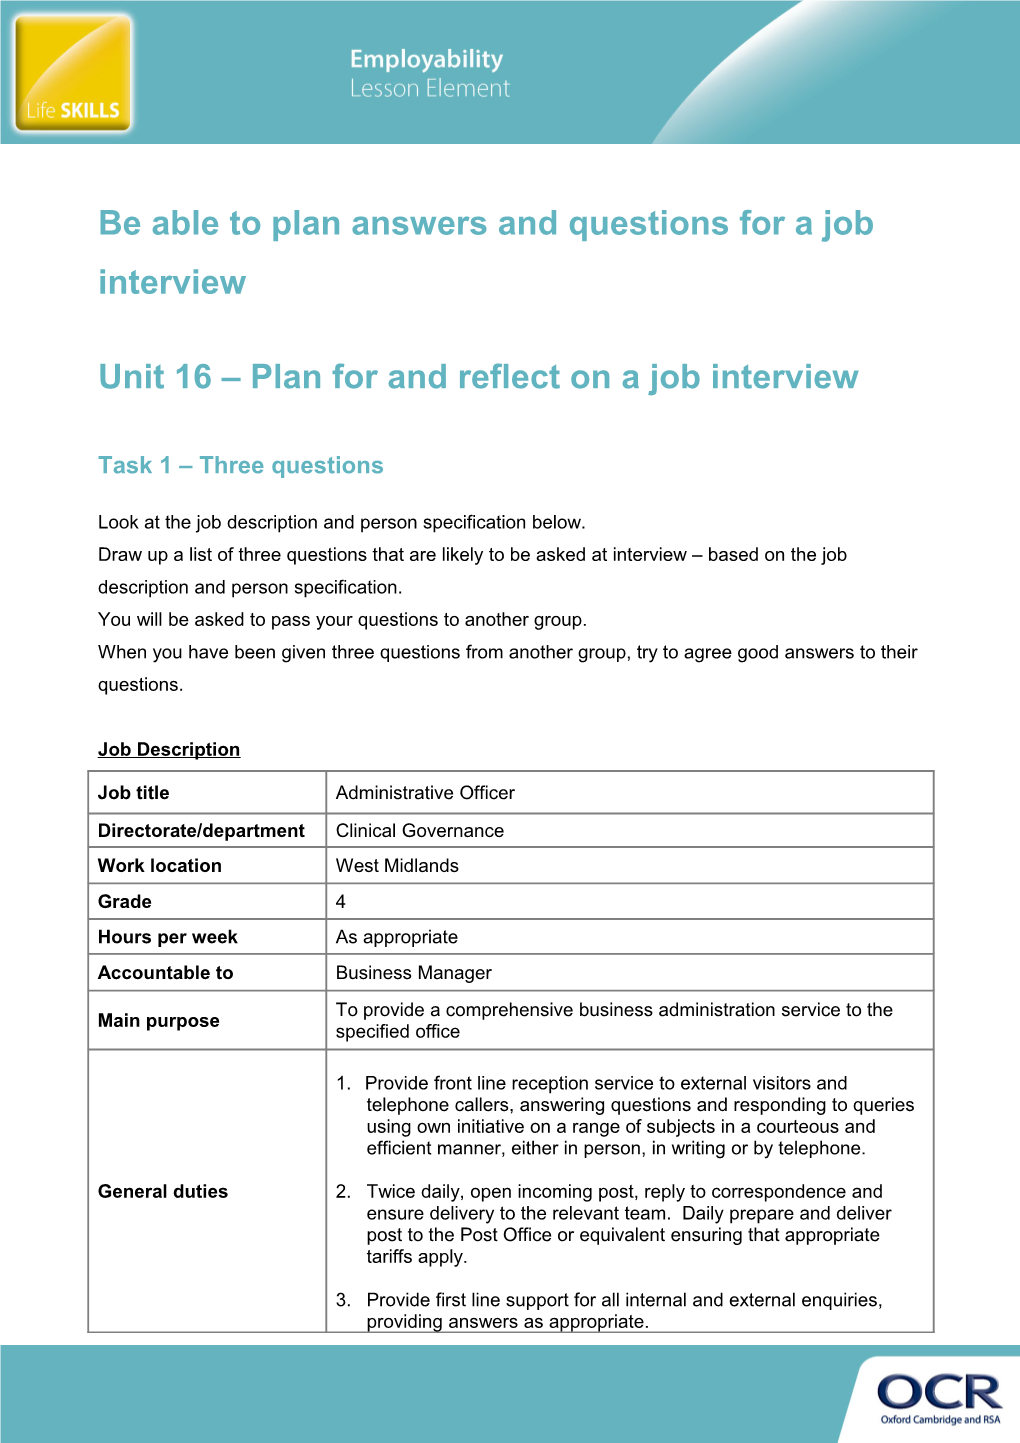 Cambridge Employability - Unit 16 - Be Able to Research Information About a Job